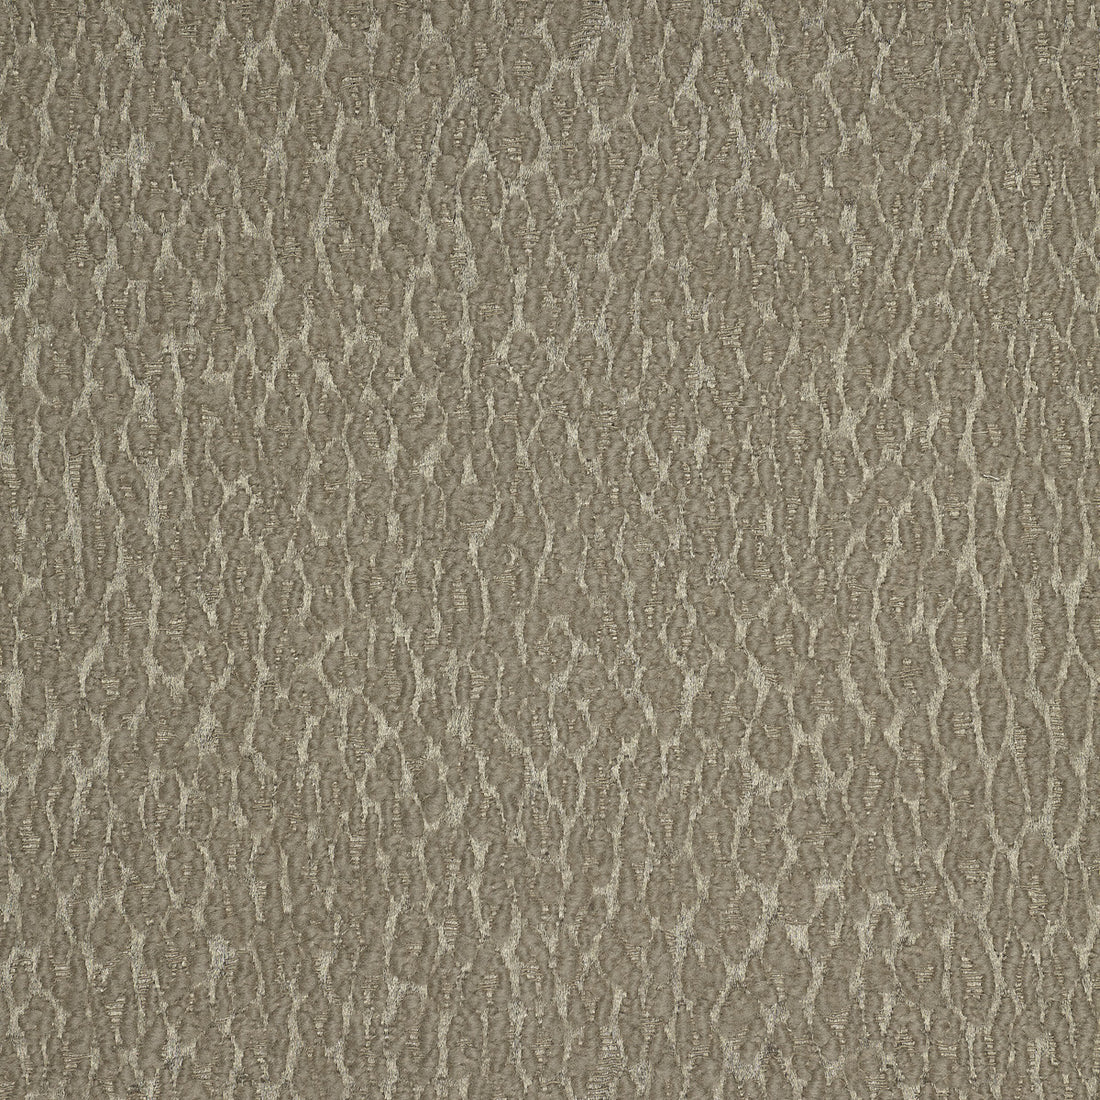 Magma fabric in 1 color - pattern LZ-30394.01.0 - by Kravet Design in the Lizzo collection